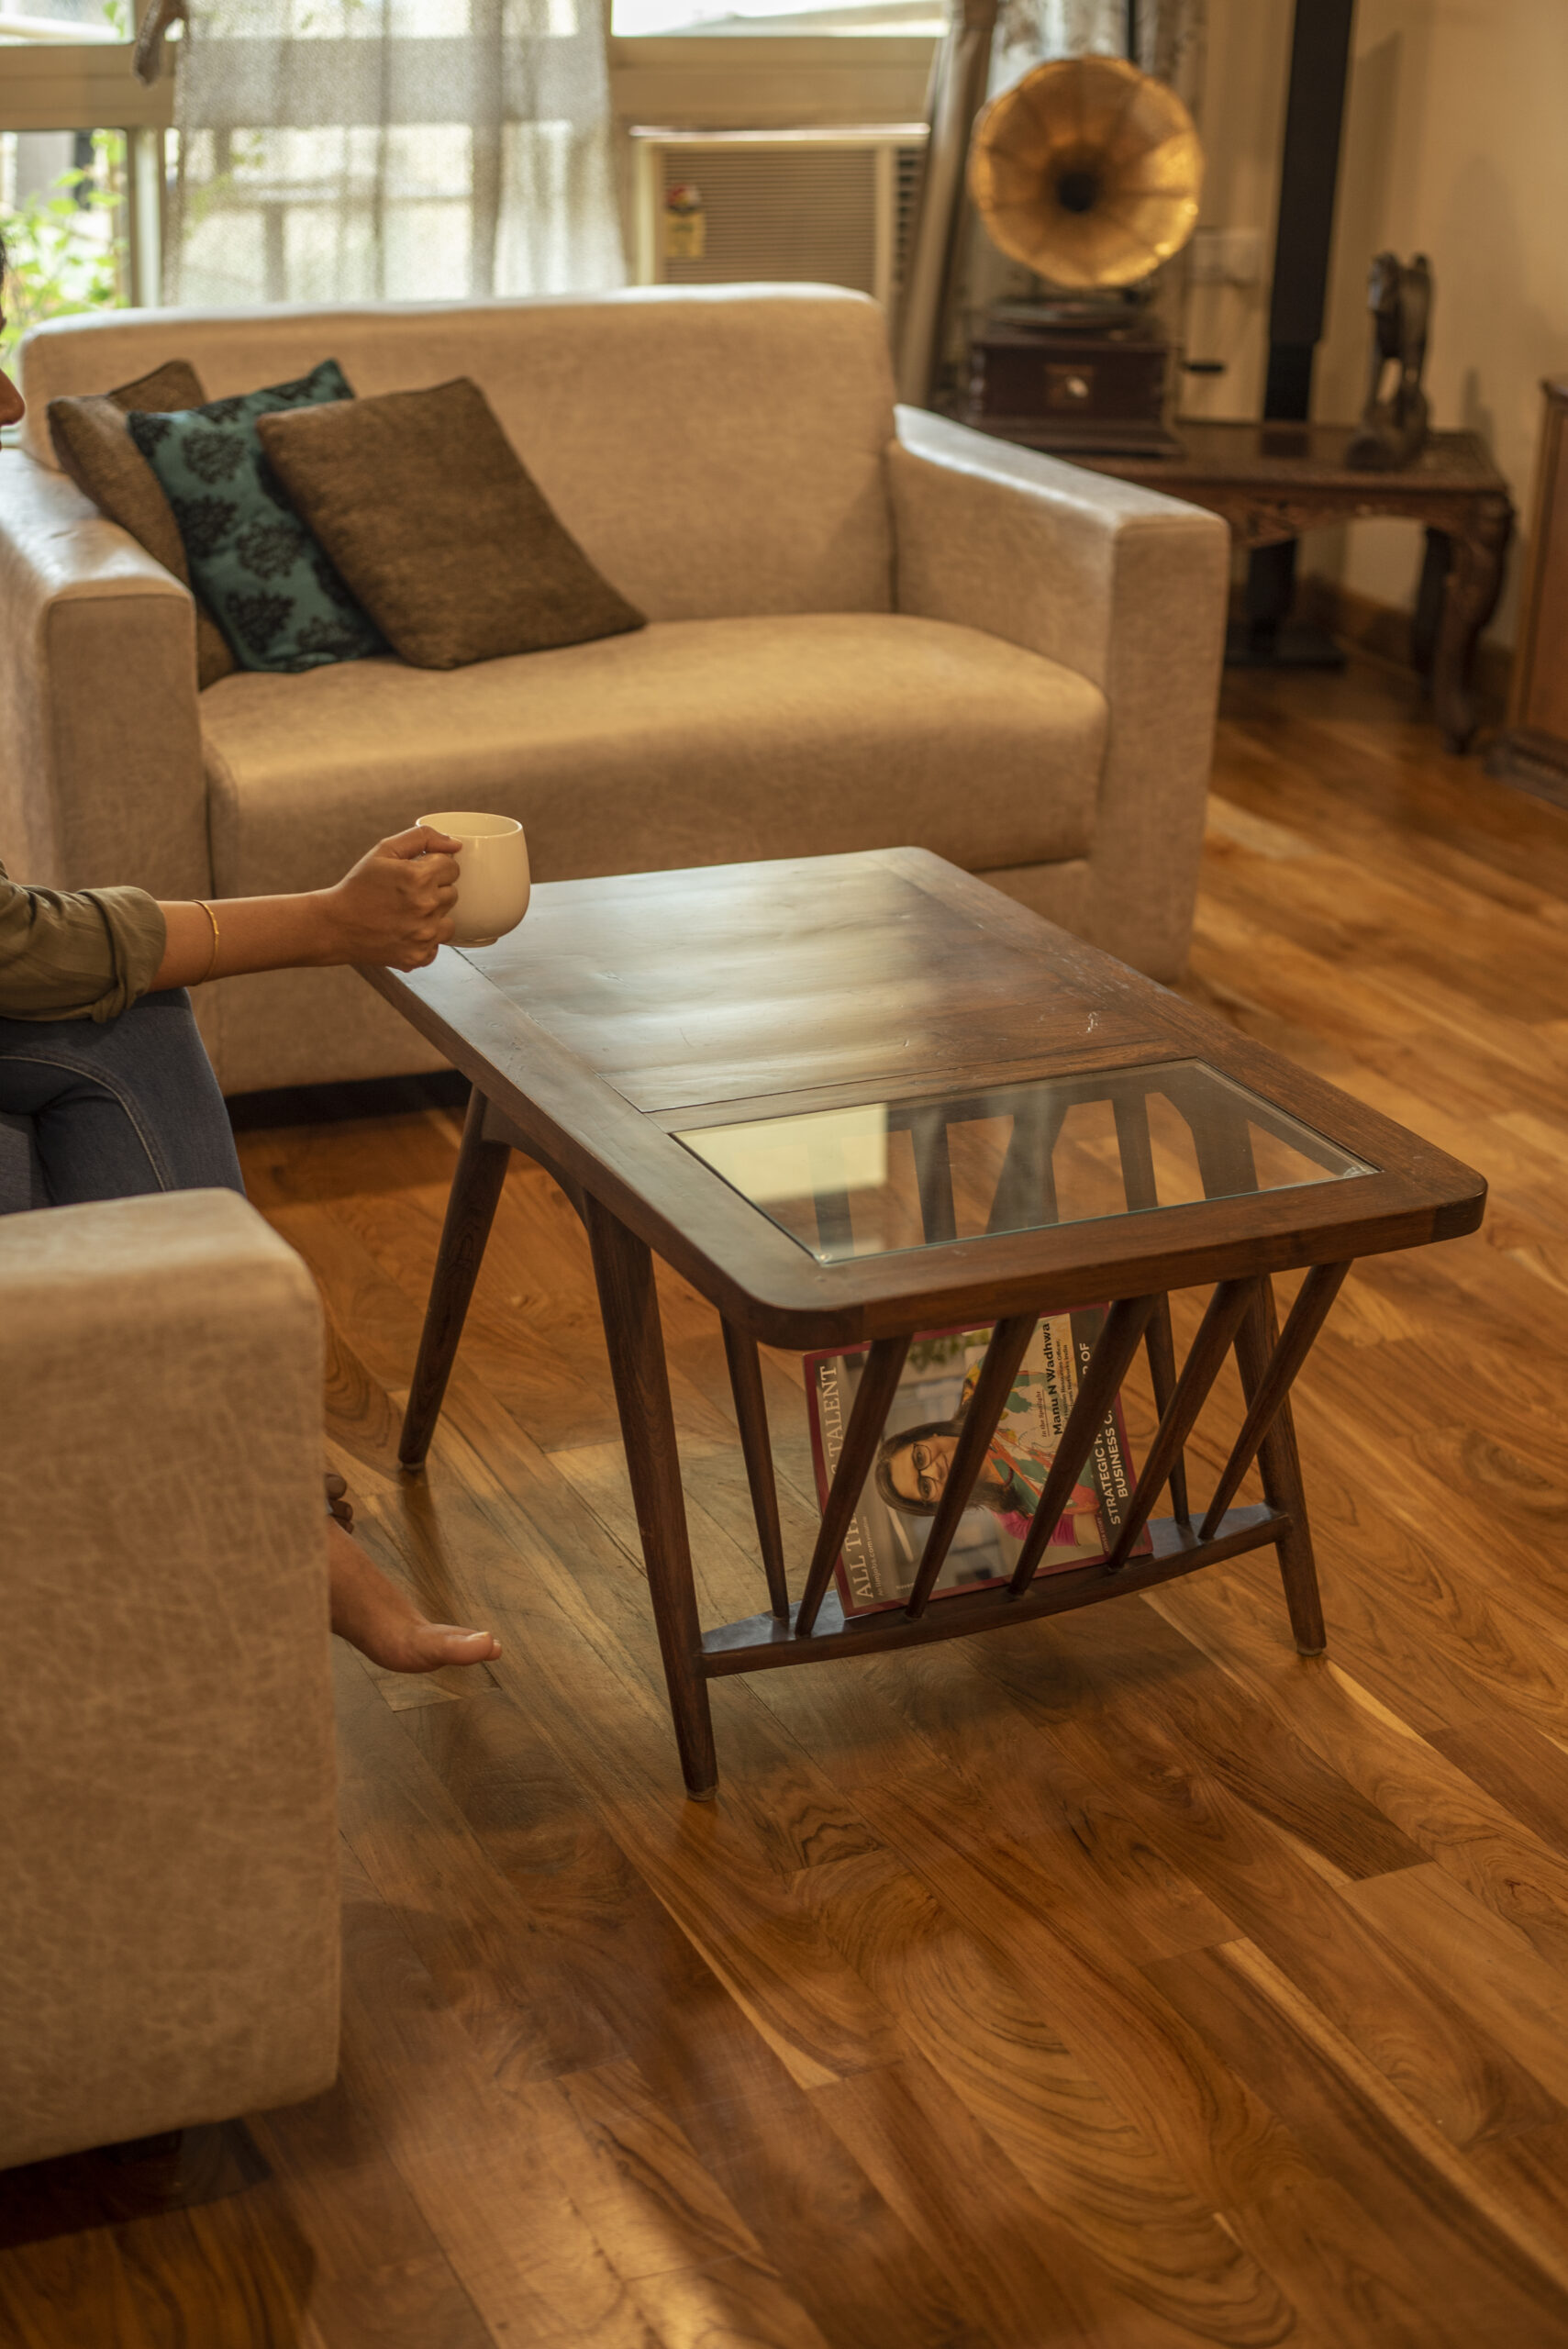 Stylsed-center-table-scaled - Teak wood furniture online shop in Mumbai